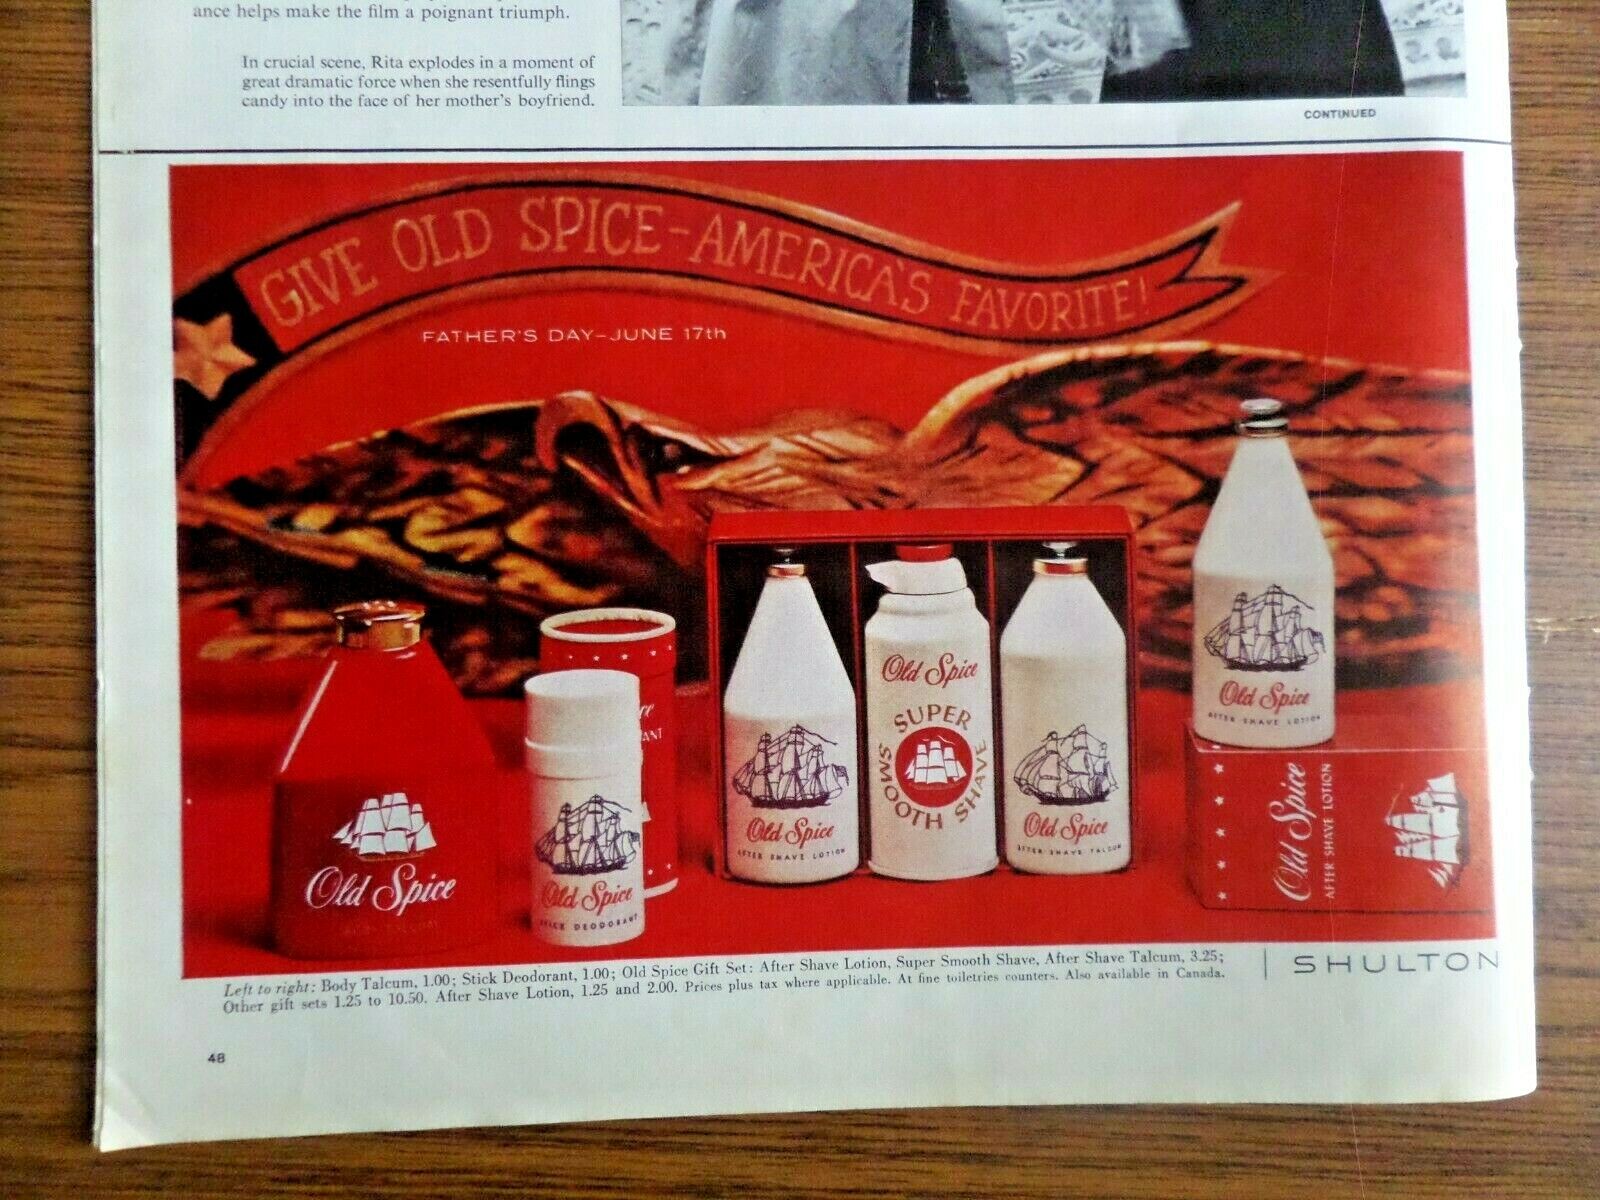 1962 Old Spice Shulton Ad Give Old Spice - America's Favorite